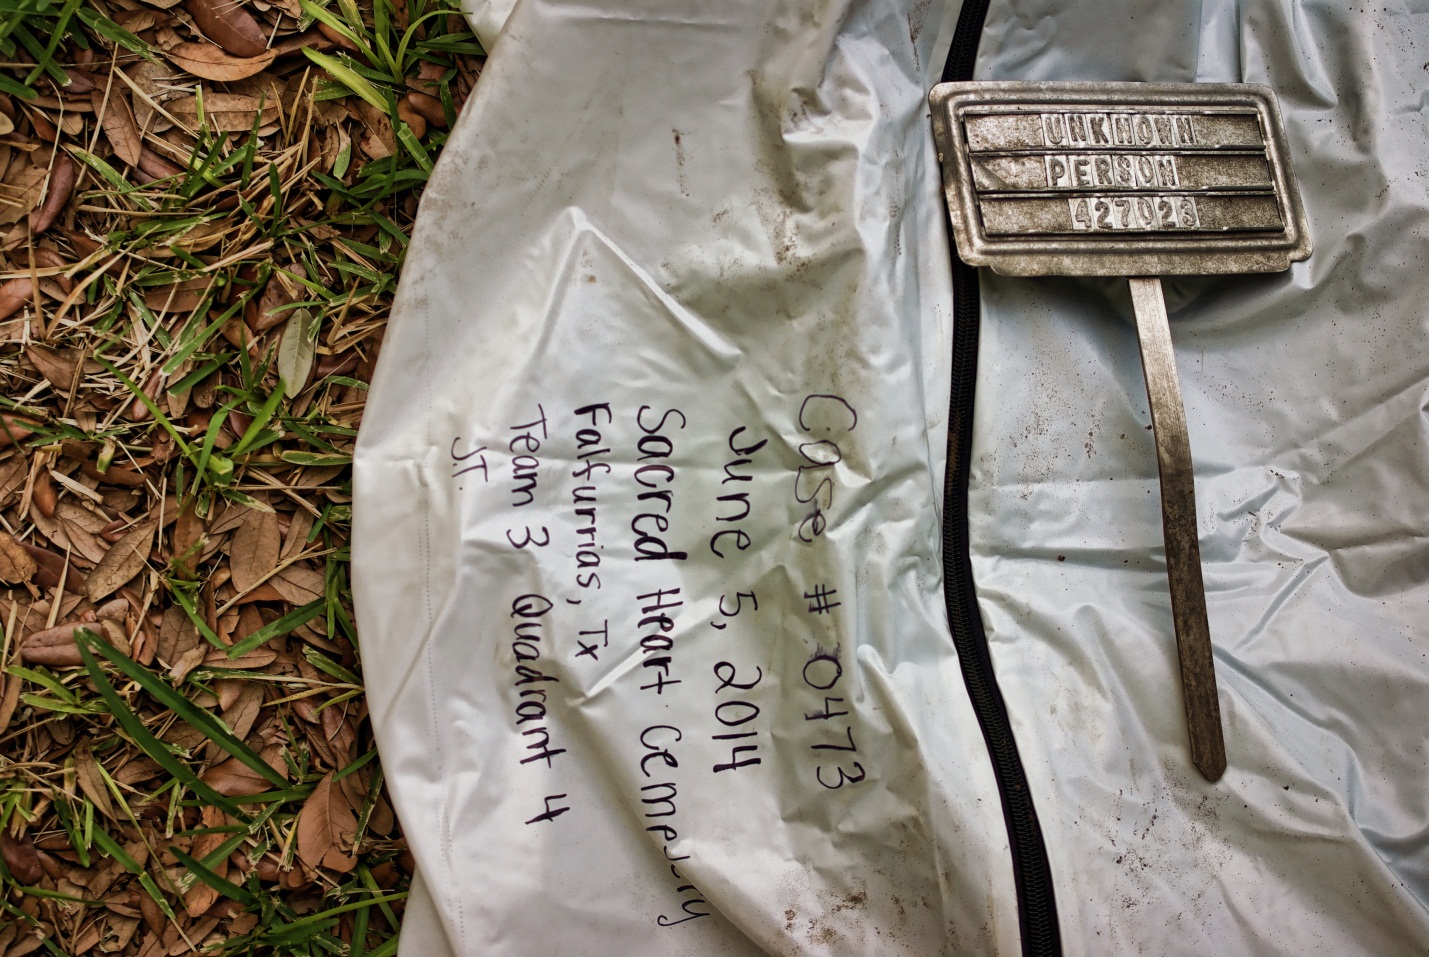 Upclose of the black writing on a body bag and a burial marker with "Unknown person" on it